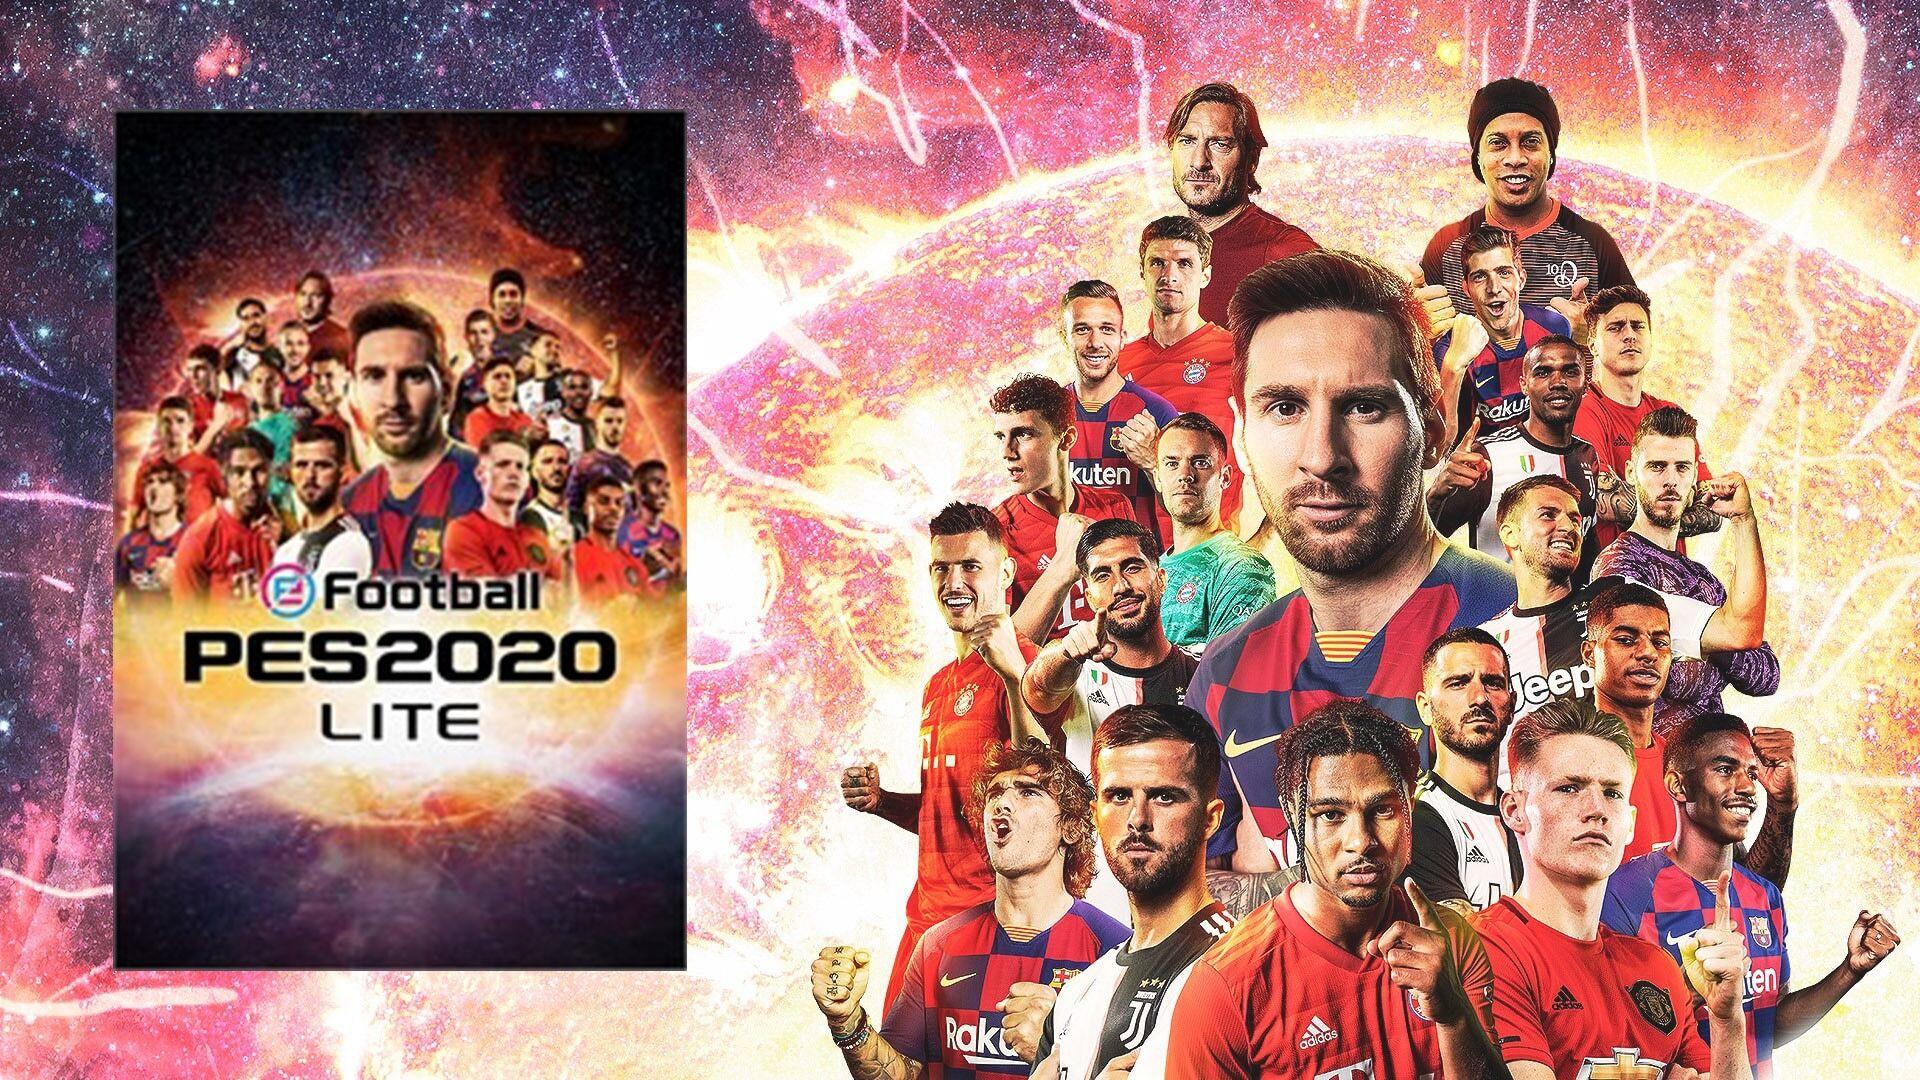 eFootball PES 2020 Lite Available Now for Free on PC, PS4